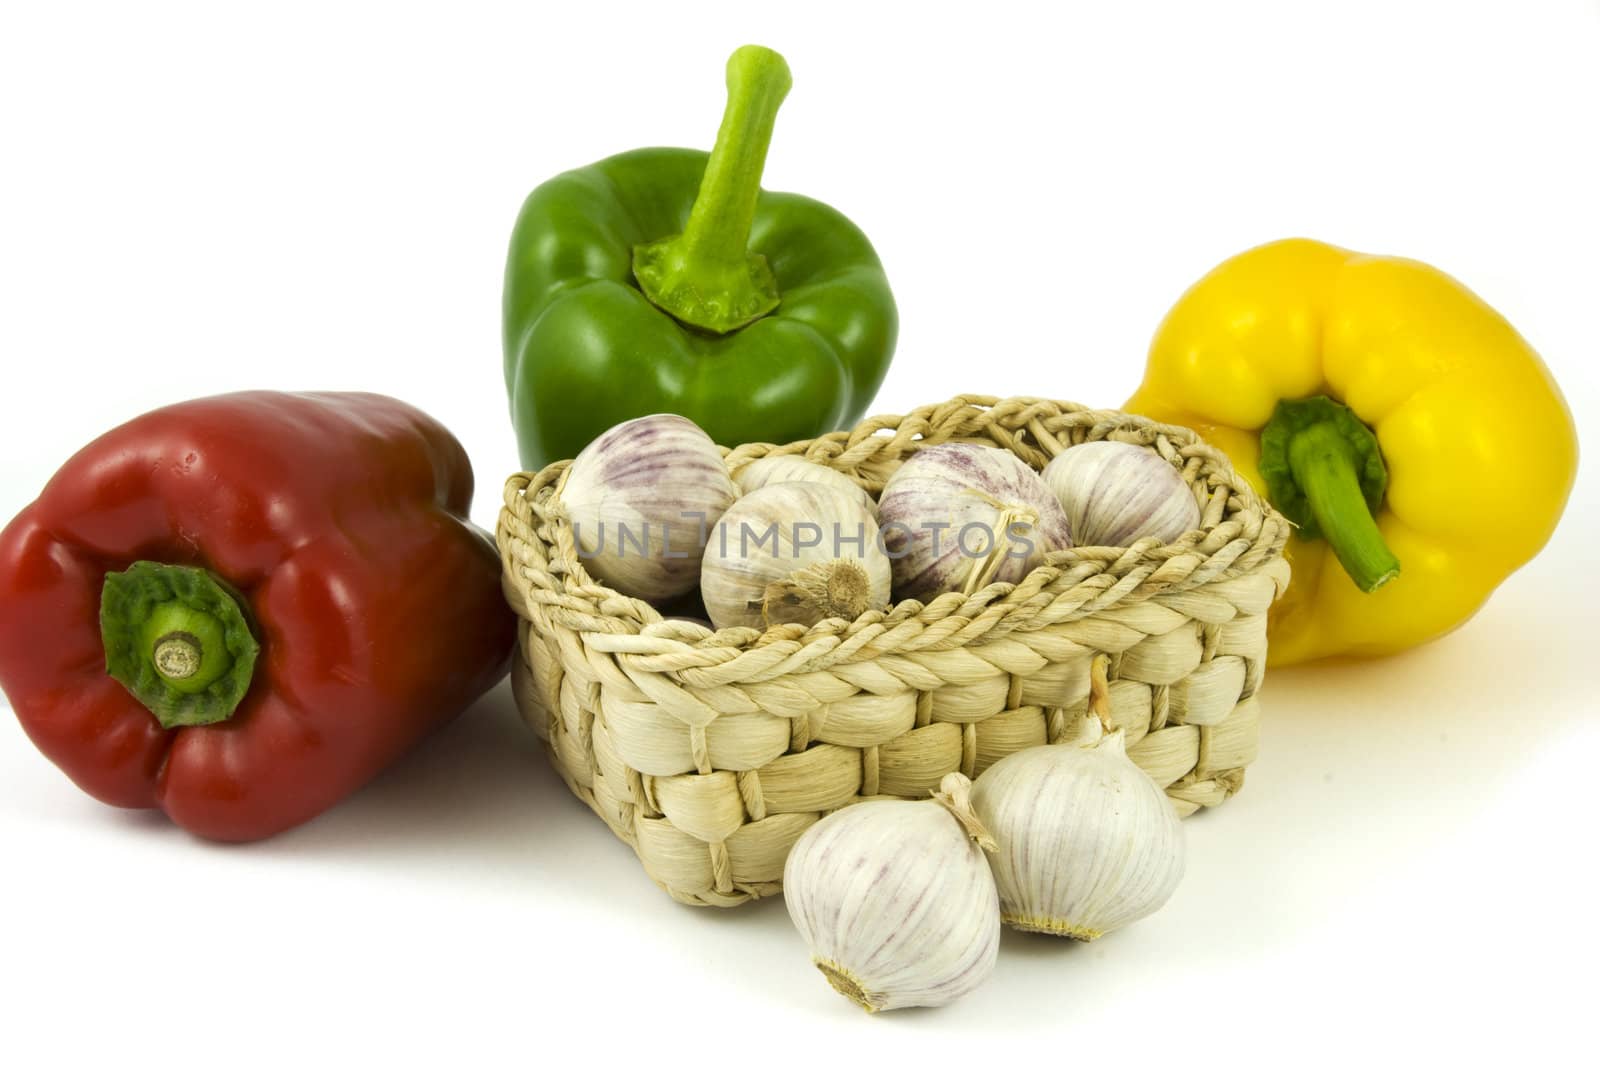 Bell peppers and basket with garlics by Gertje